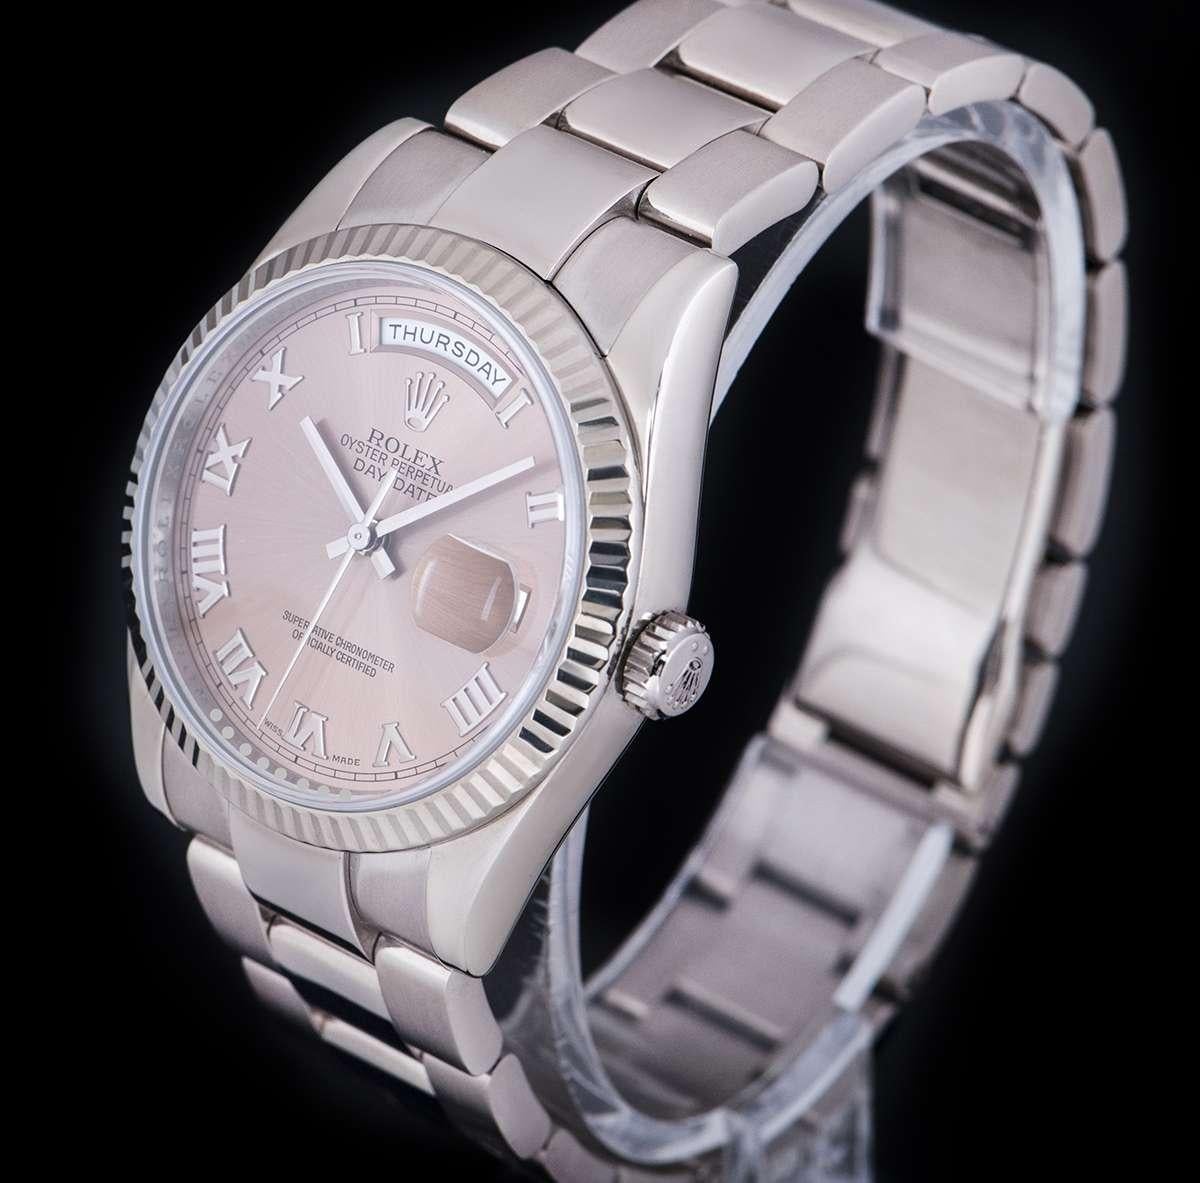 An 18k White Gold Oyster Perpetual Day-Date Gents Wristwatch, salmon dial with applied roman numerals, day at 12 0'clock, date at 3 0'clock, a fixed 18k white gold fluted bezel, an 18k white gold oyster bracelet with a concealed 18k white gold